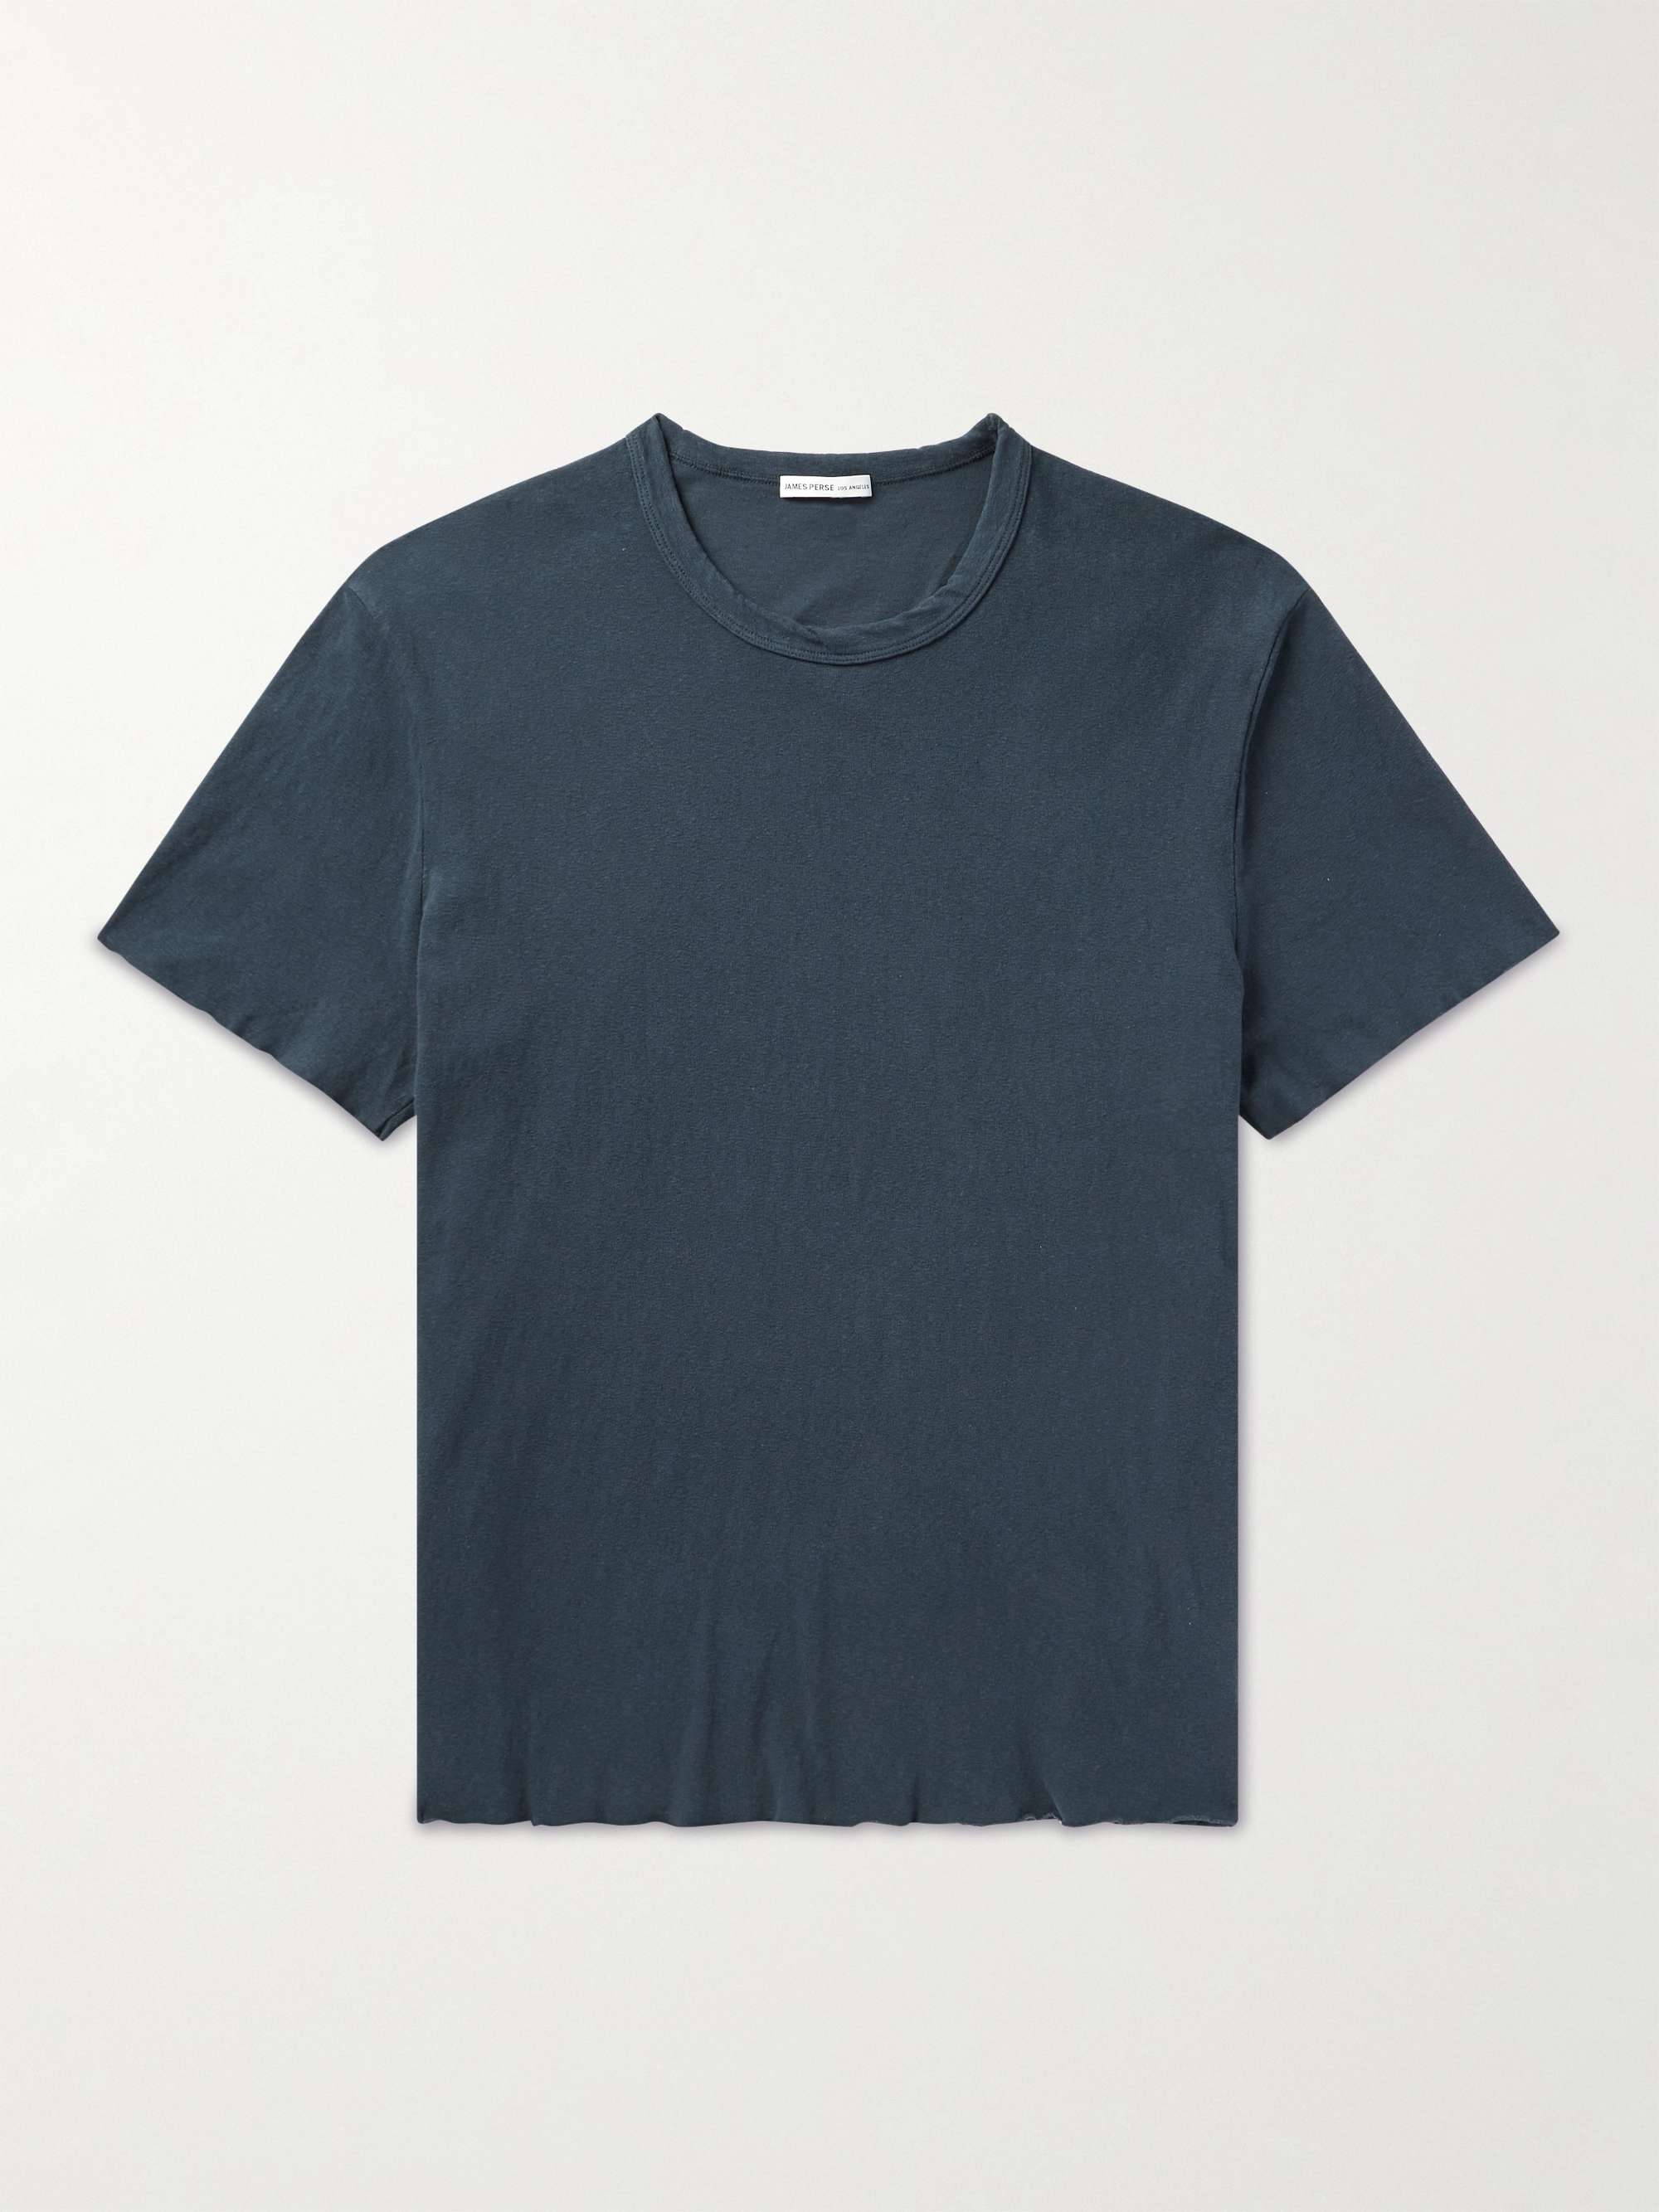 JAMES PERSE Garment-Dyed Brushed Cotton-Blend Jersey T-Shirt